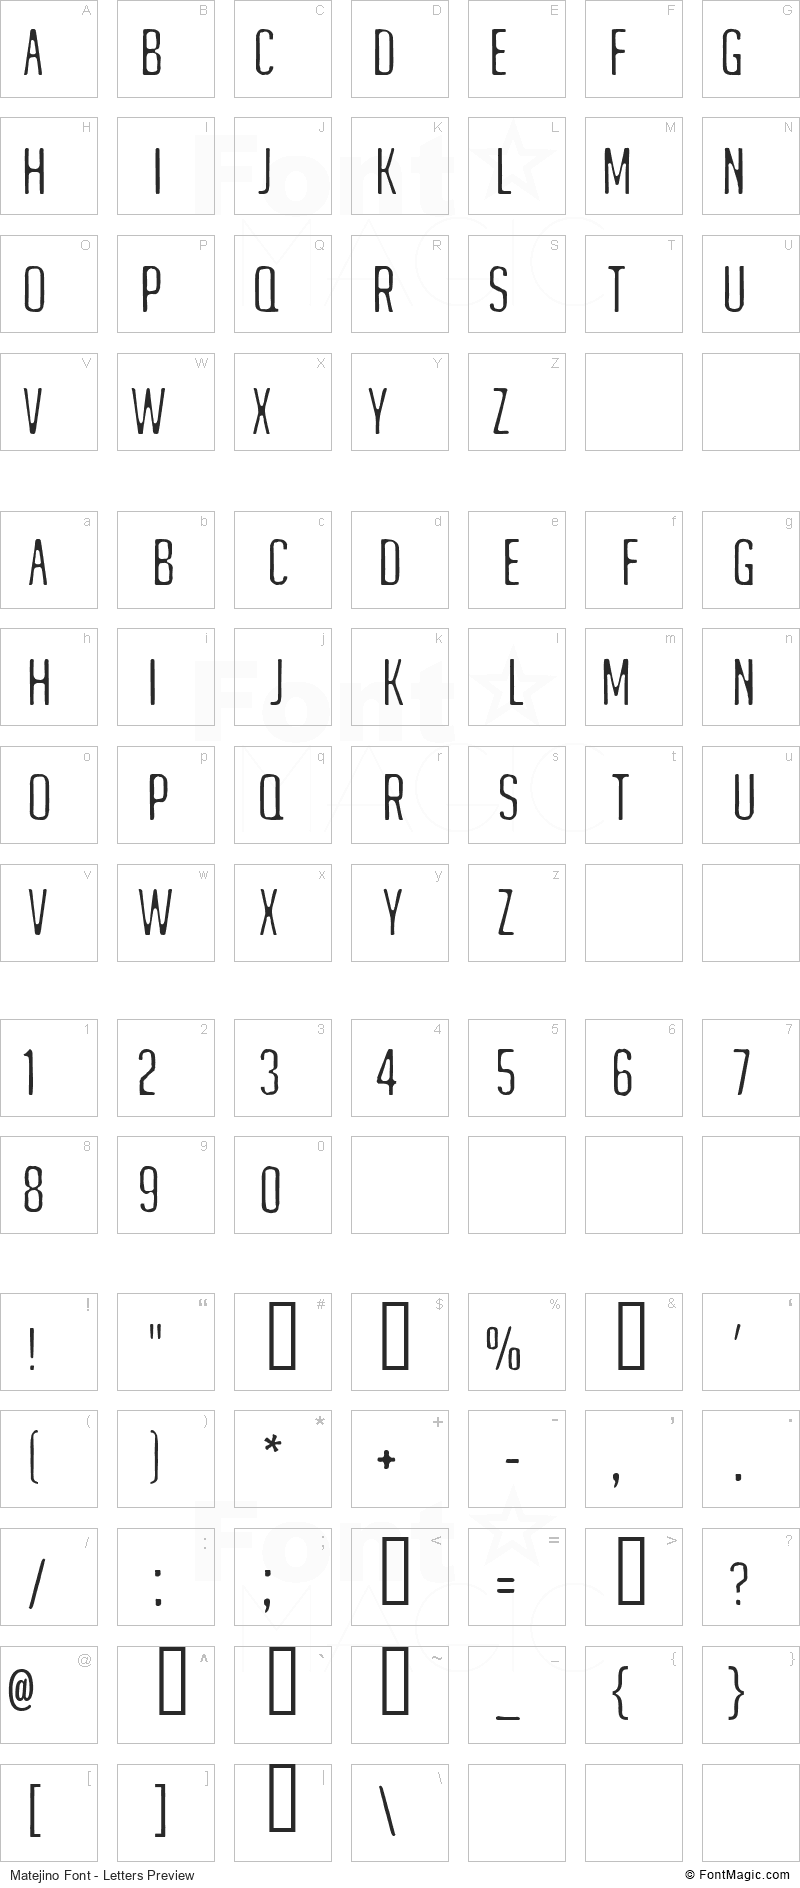 Matejino Font - All Latters Preview Chart